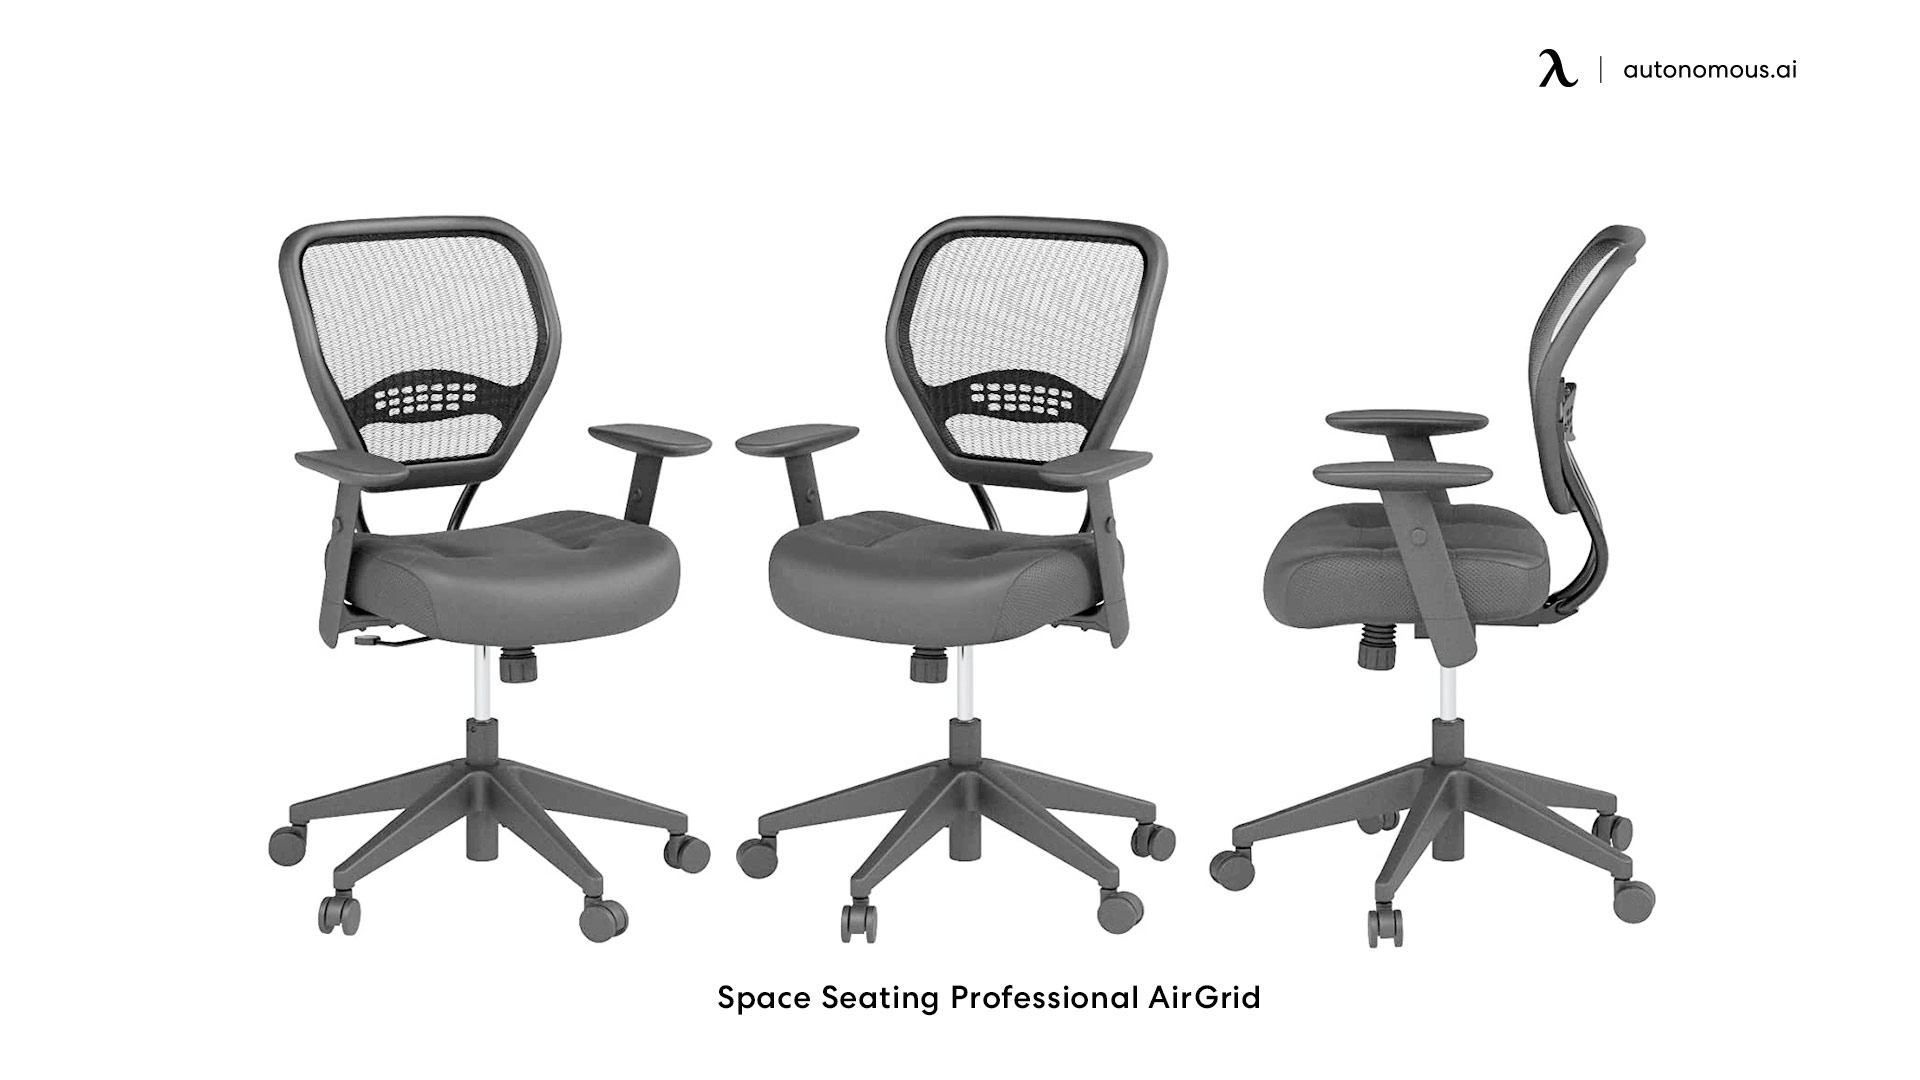 Space Seating adjustable office chair